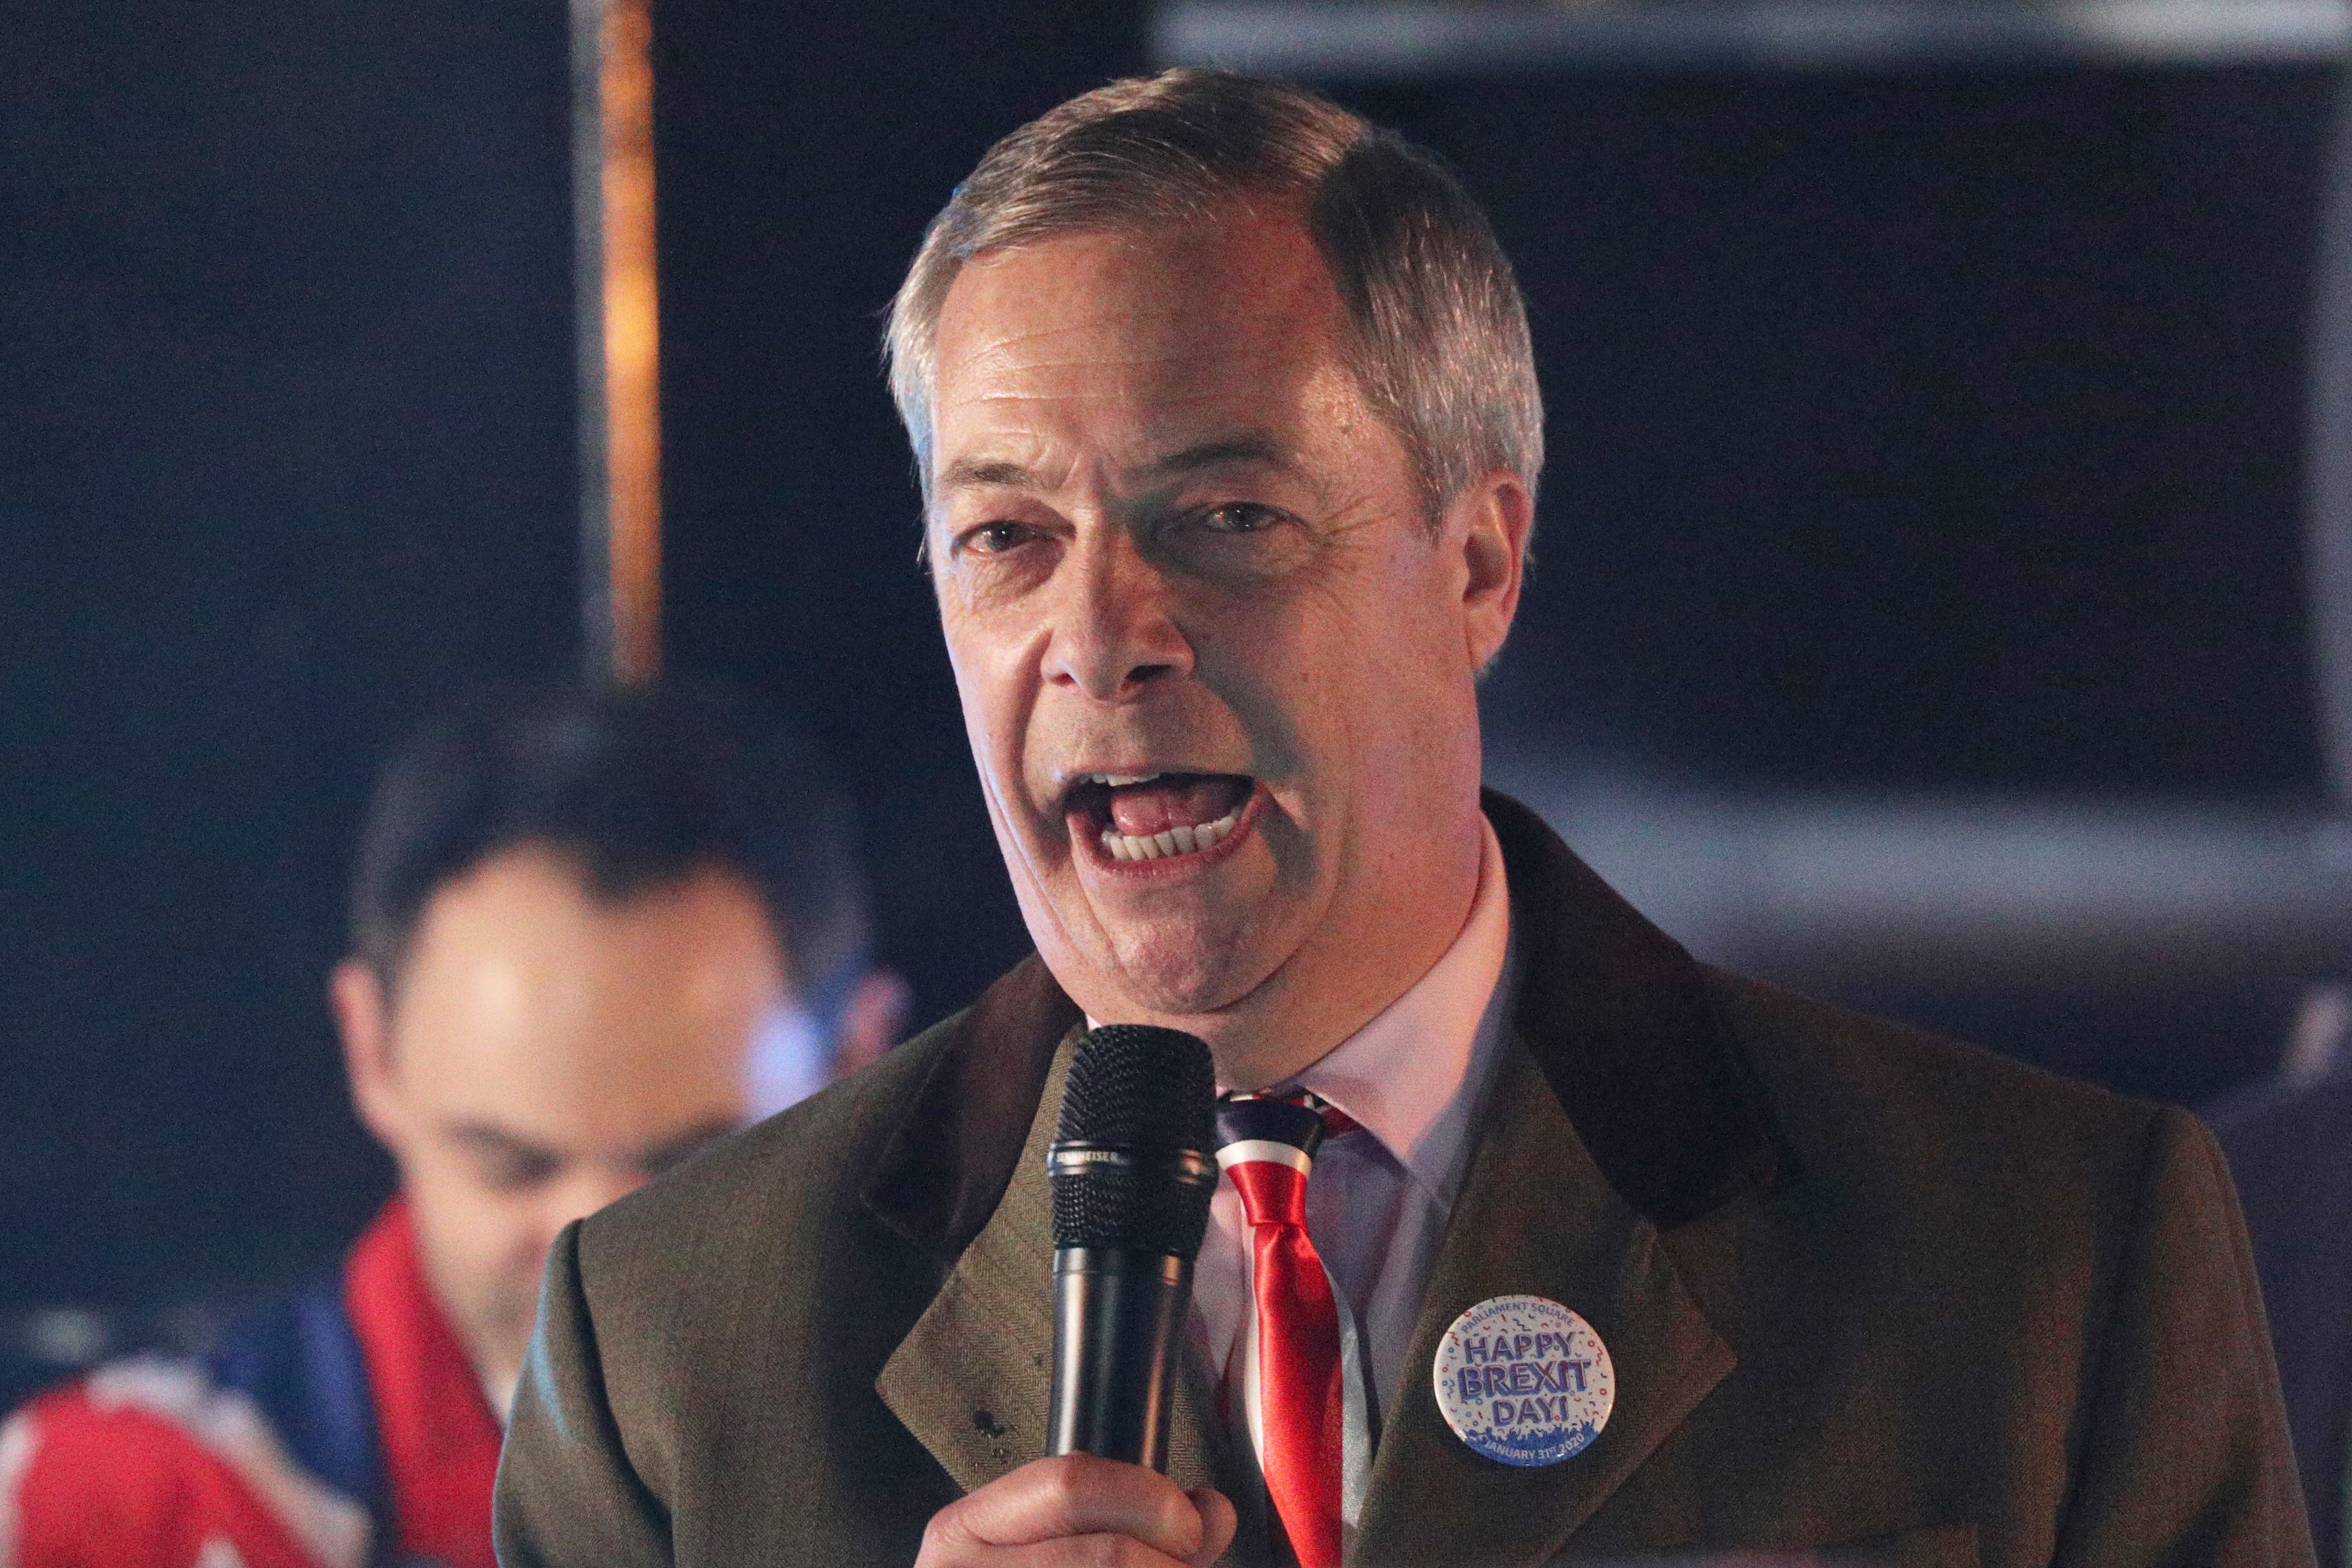 Nigel Farage has said he will continue to campaign for broader change in the banking industry